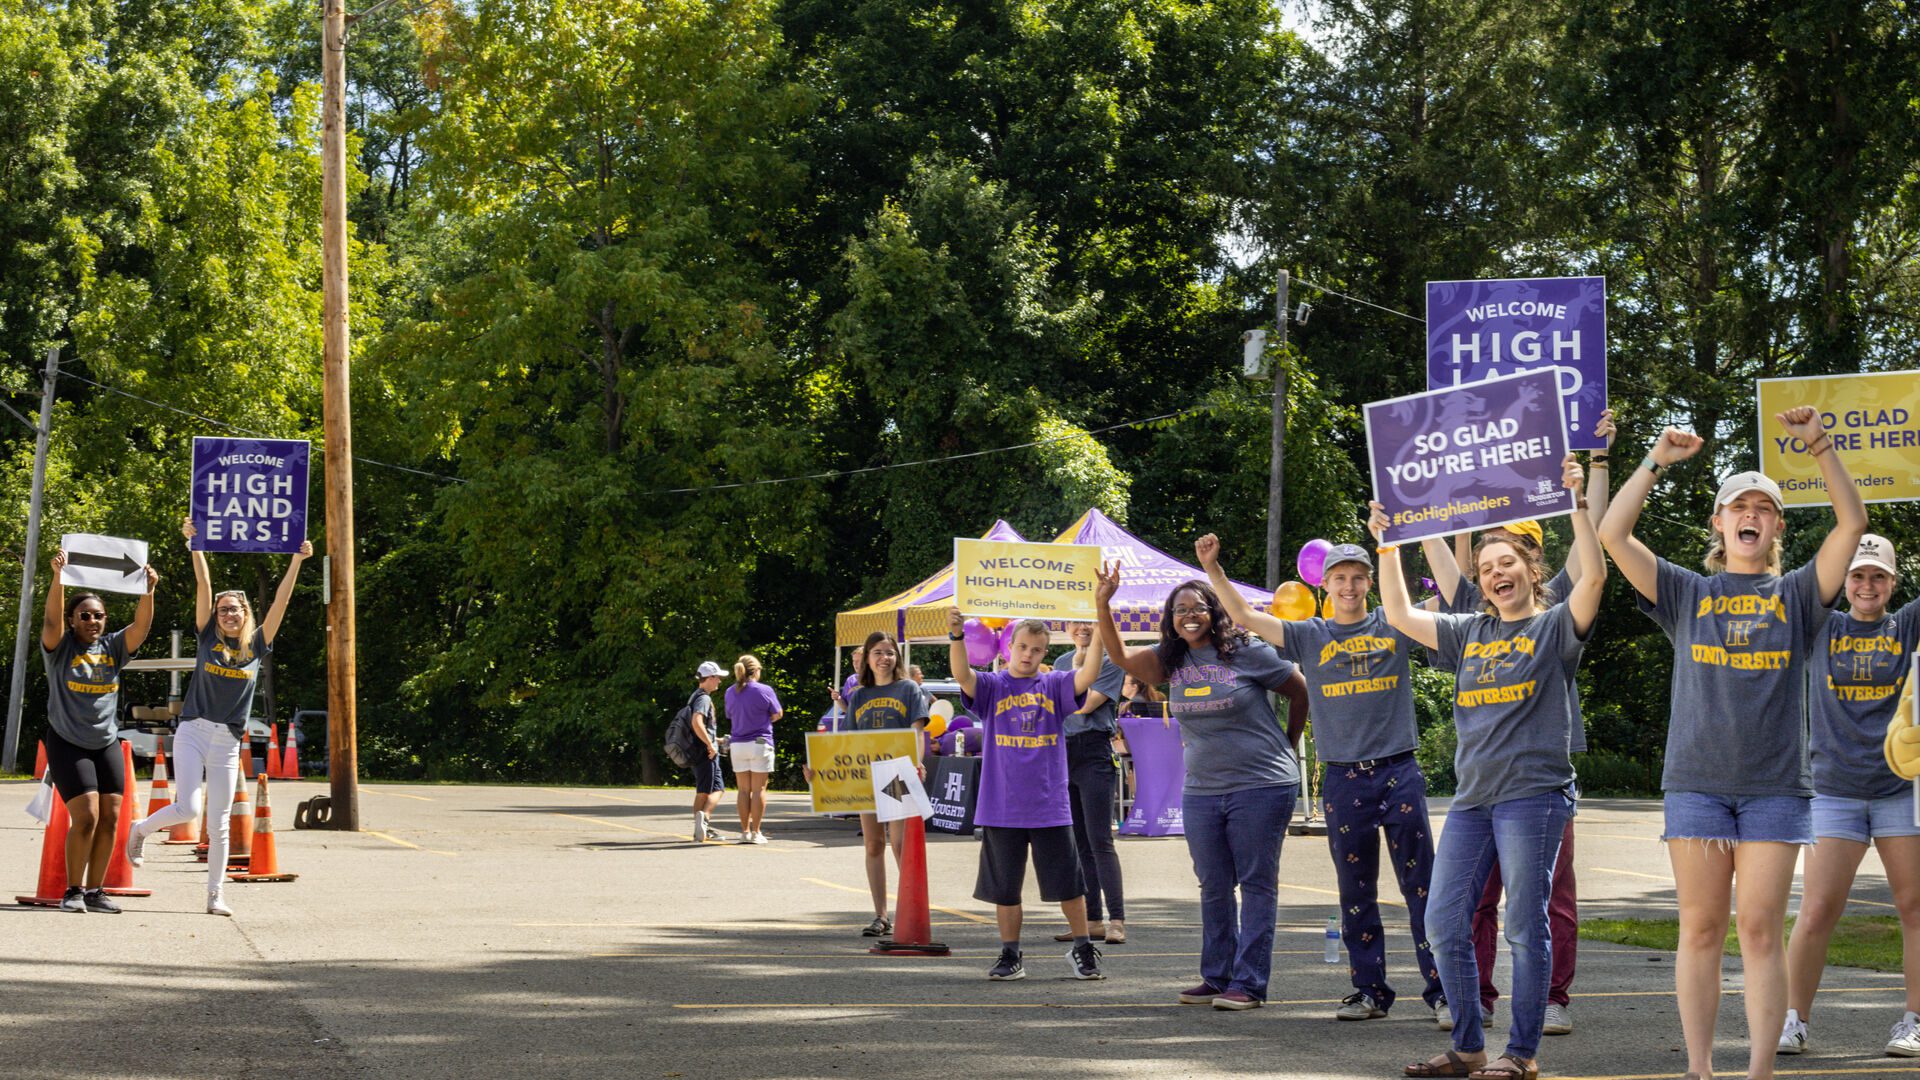 Houghton staff students welcoming incoming families during move-in day.